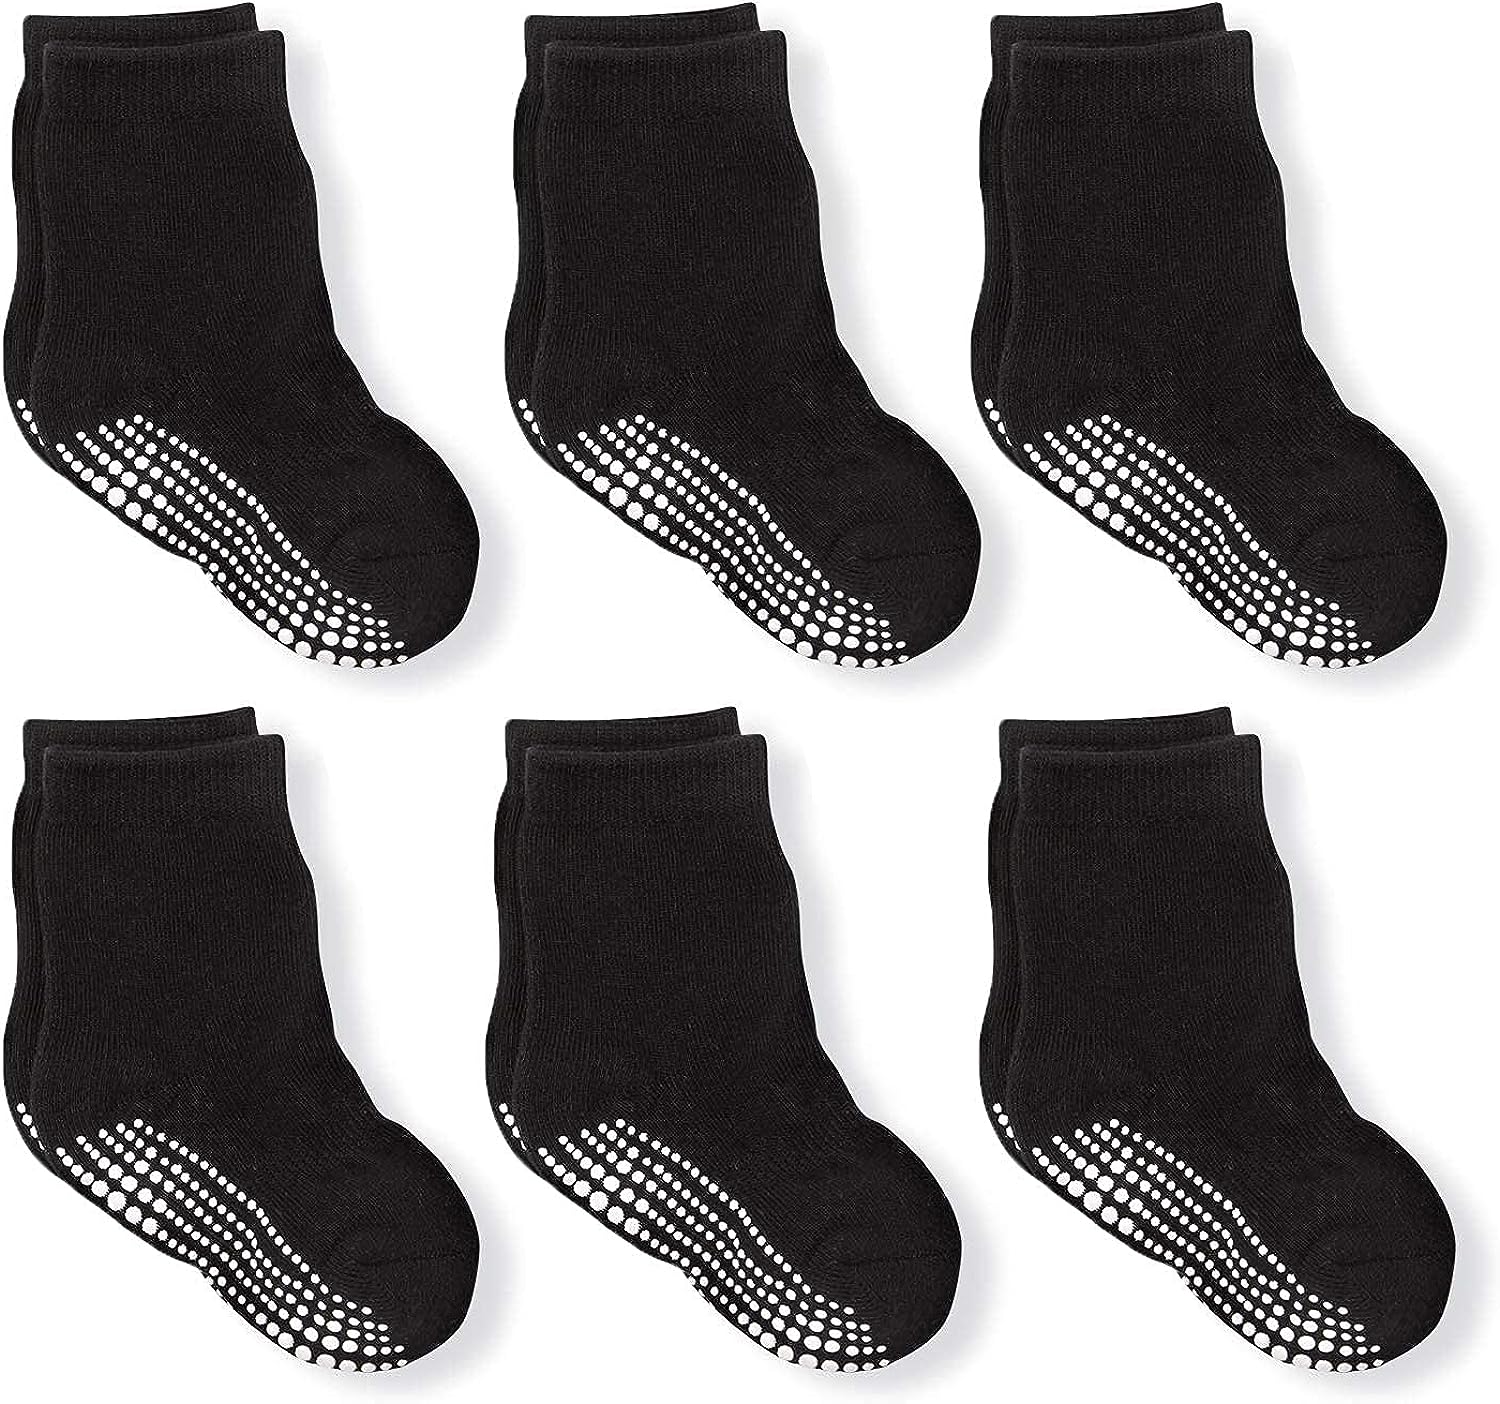 LA ACTIVE Non Slip Grip Ankle Boys and Girls Socks for Babies